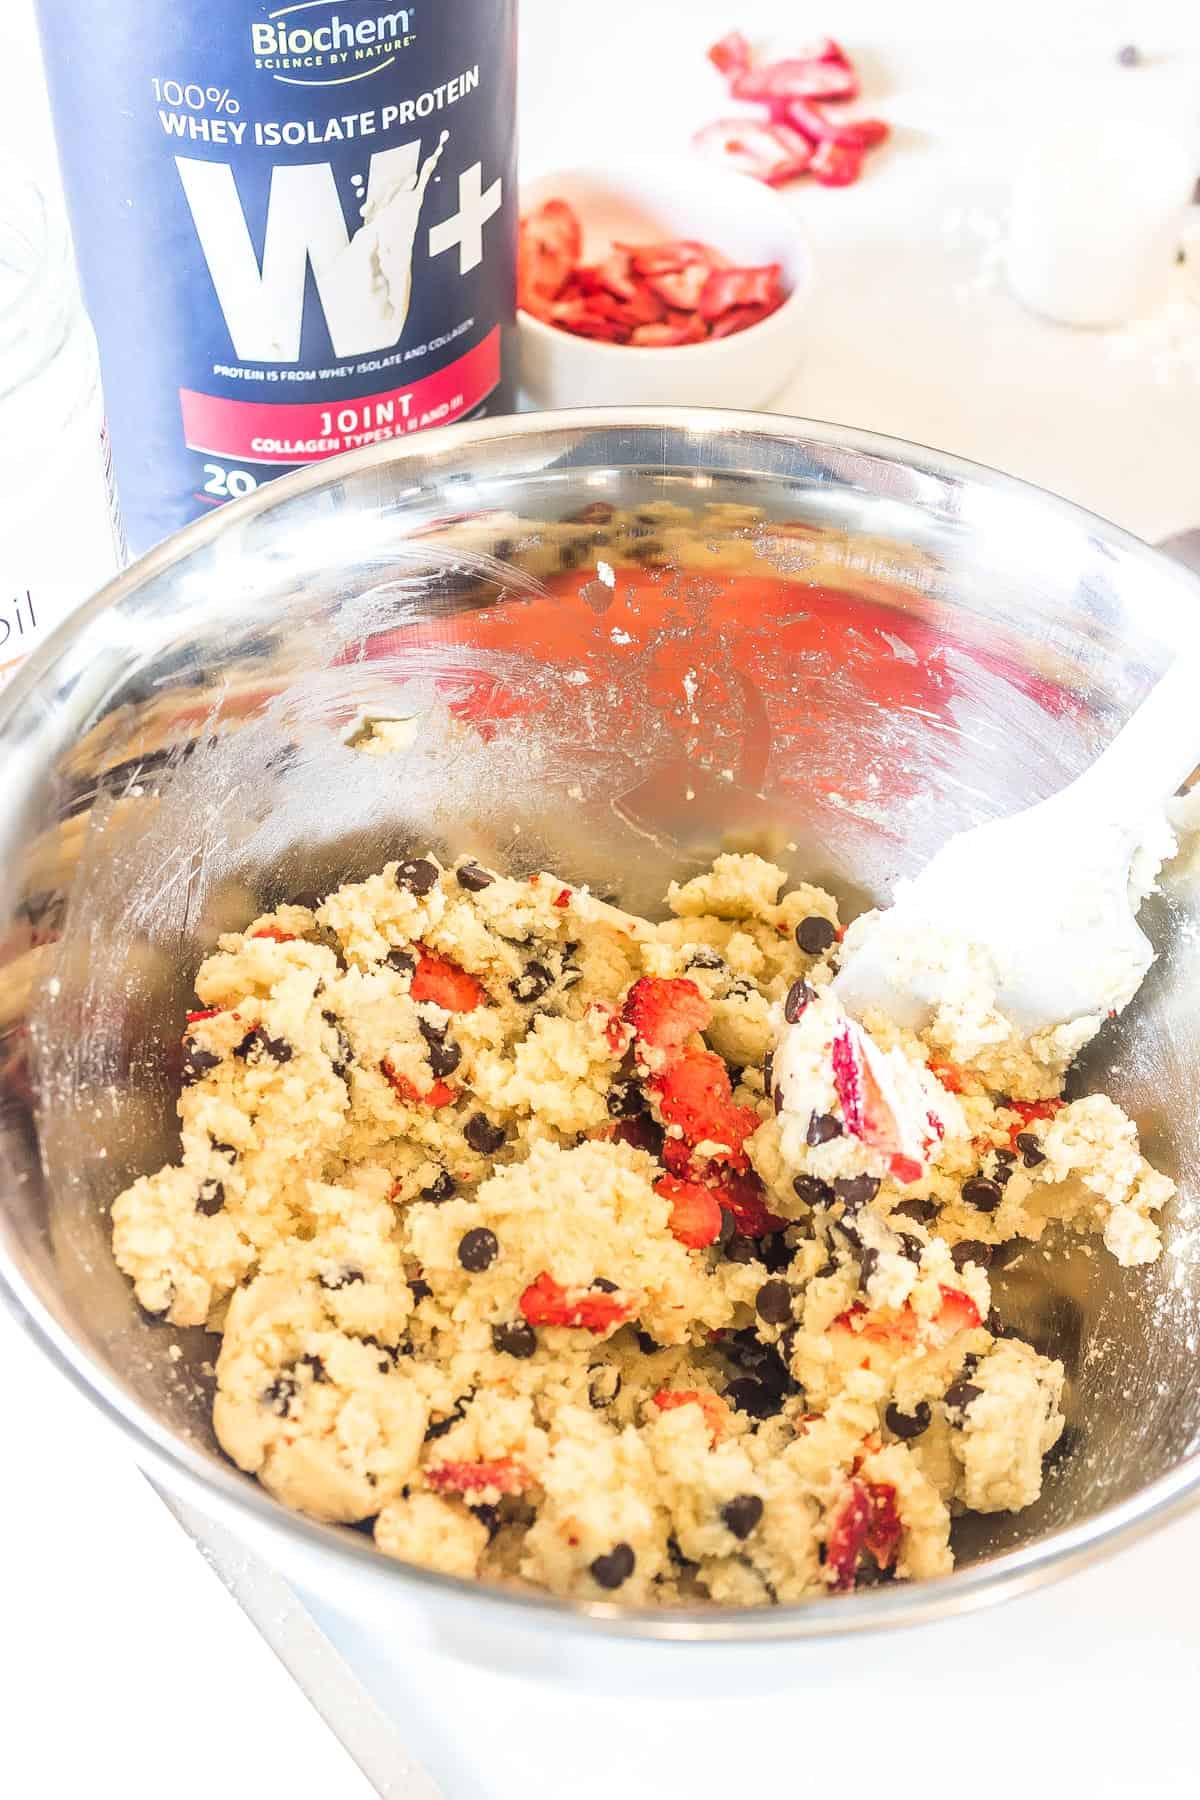 Keto Strawberry Chocolate Chip Scones mixture in bowl